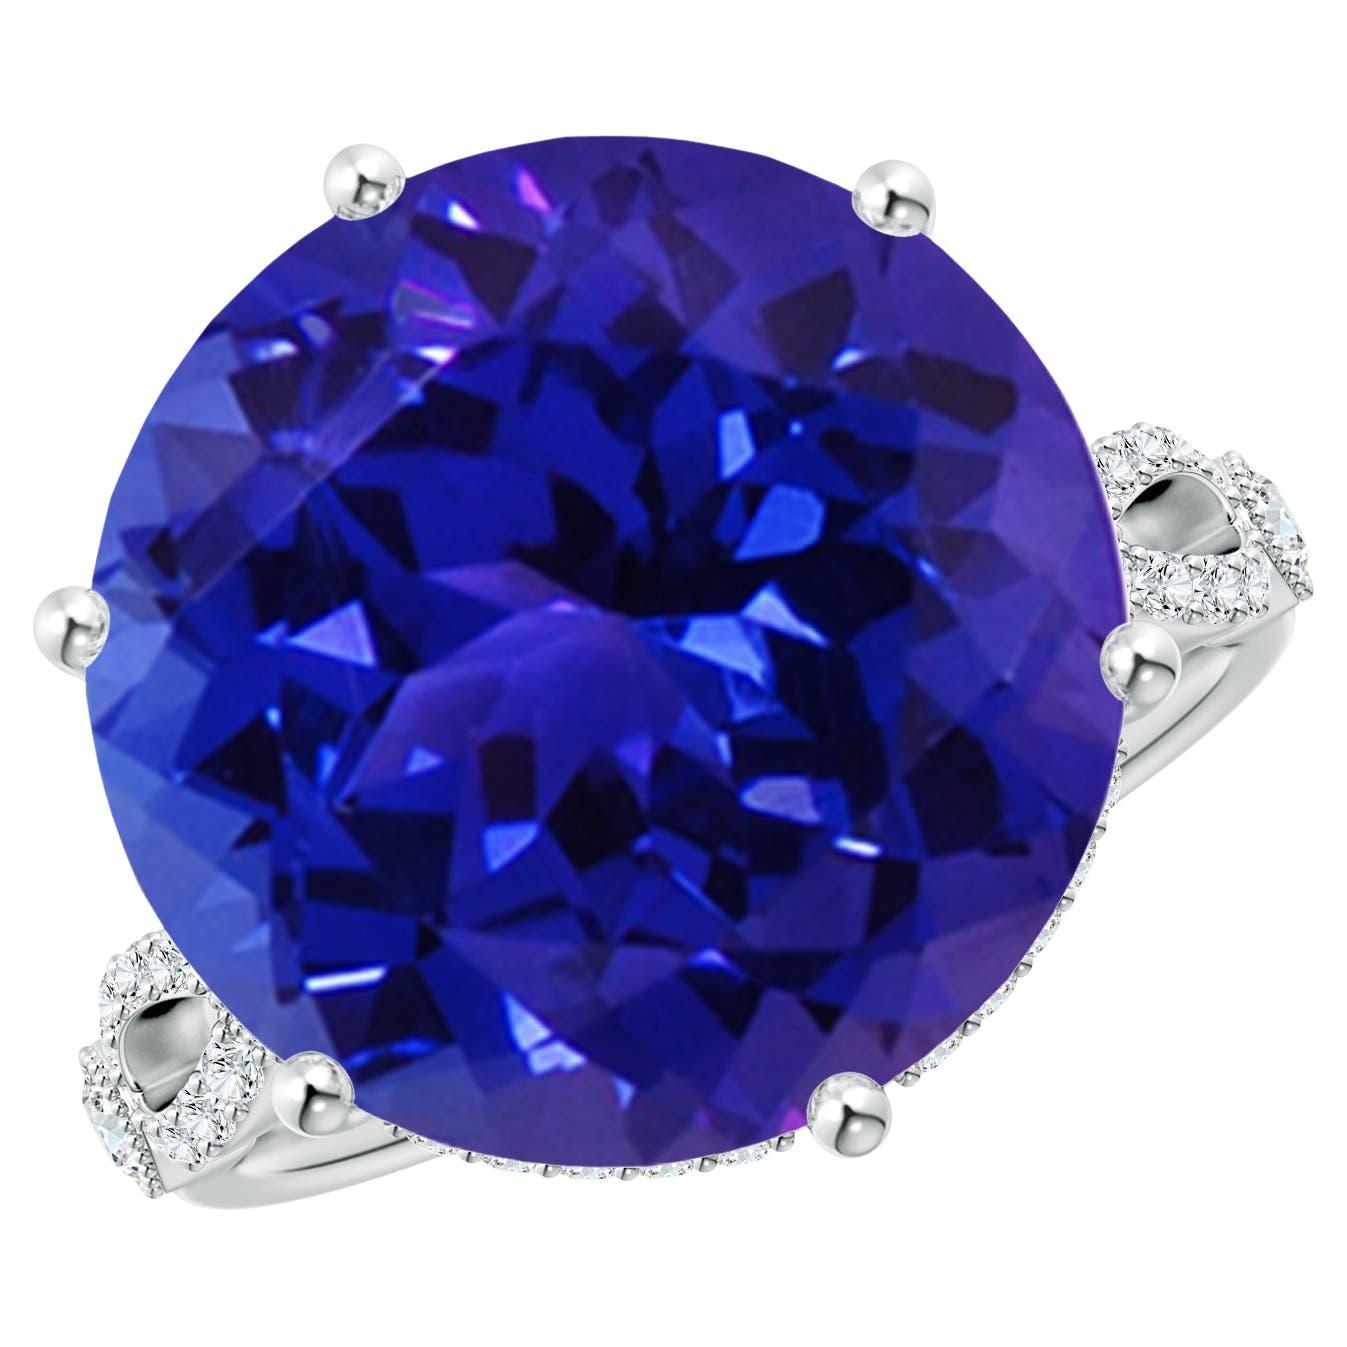 For Sale:  Angara GIA Certified Natural Tanzanite Solitaire Ring in White Gold